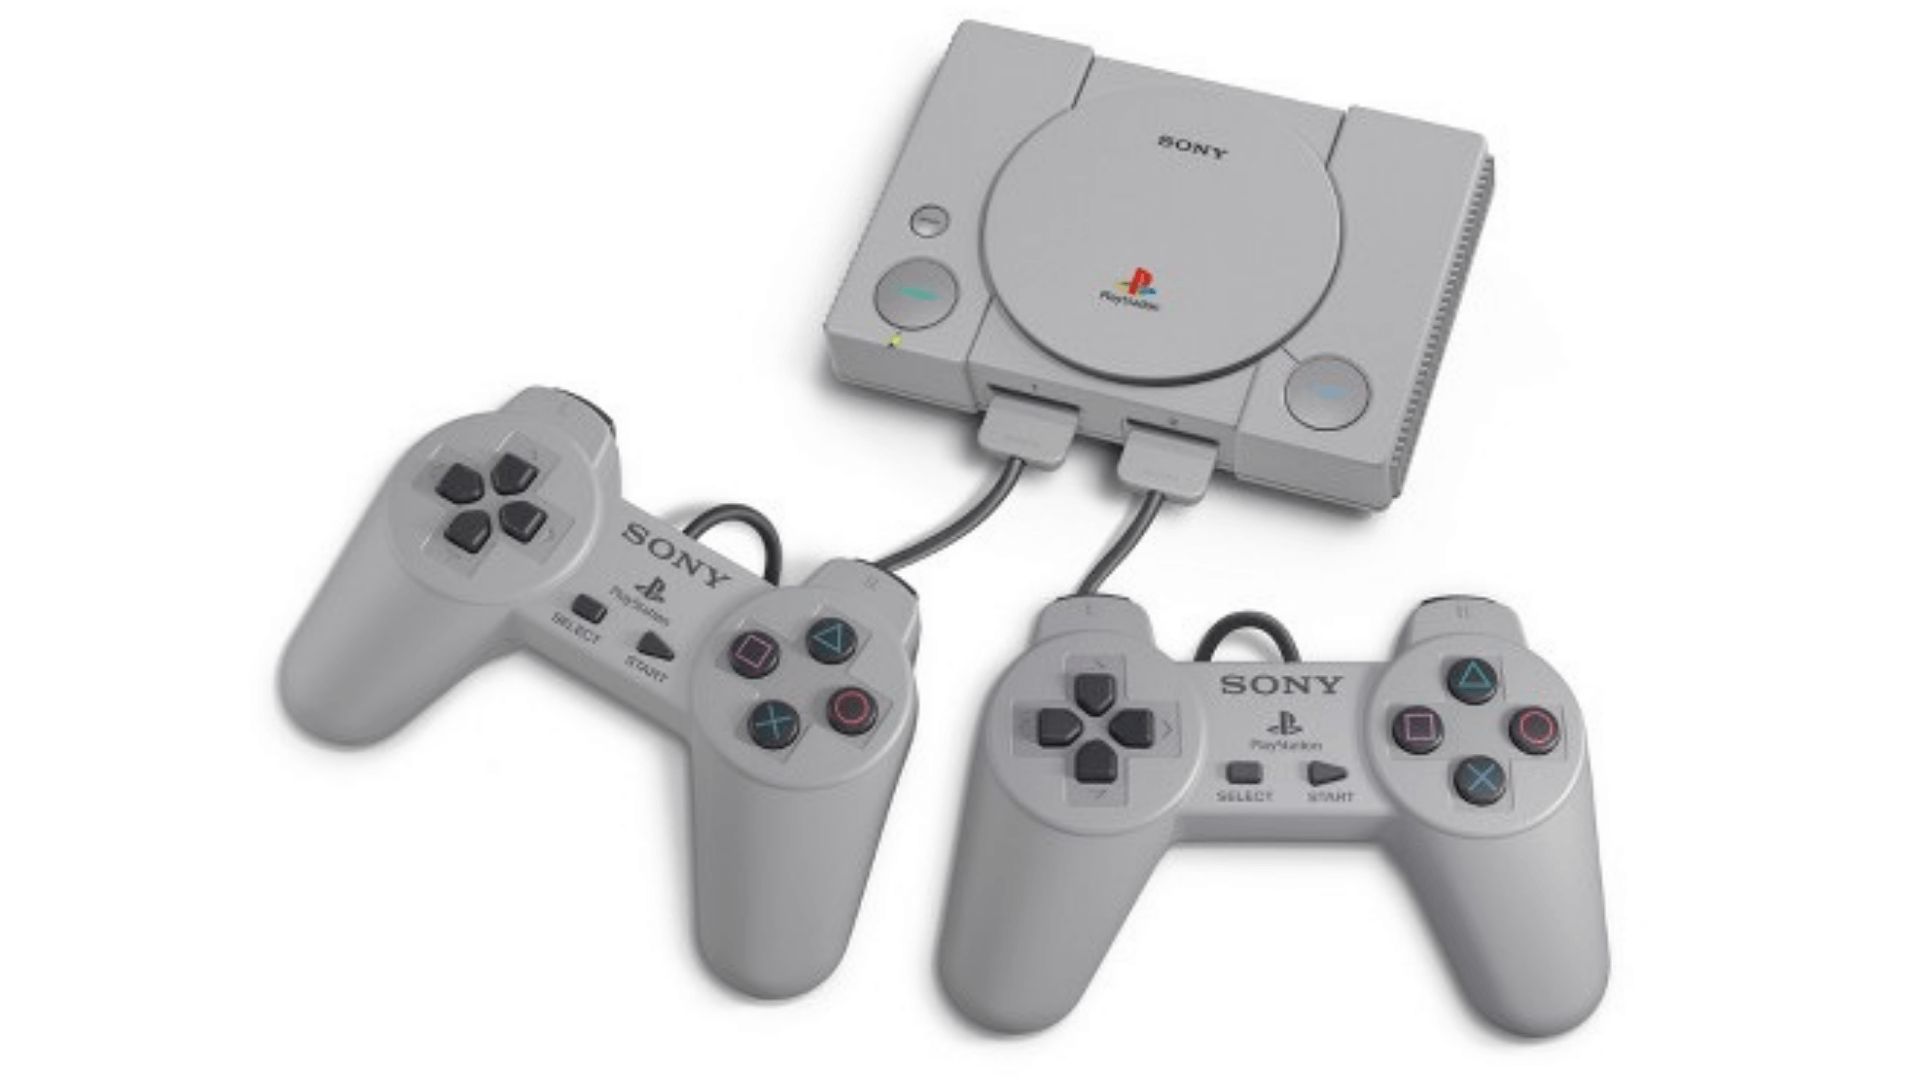 Get the PlayStation Classic Now for Only $20